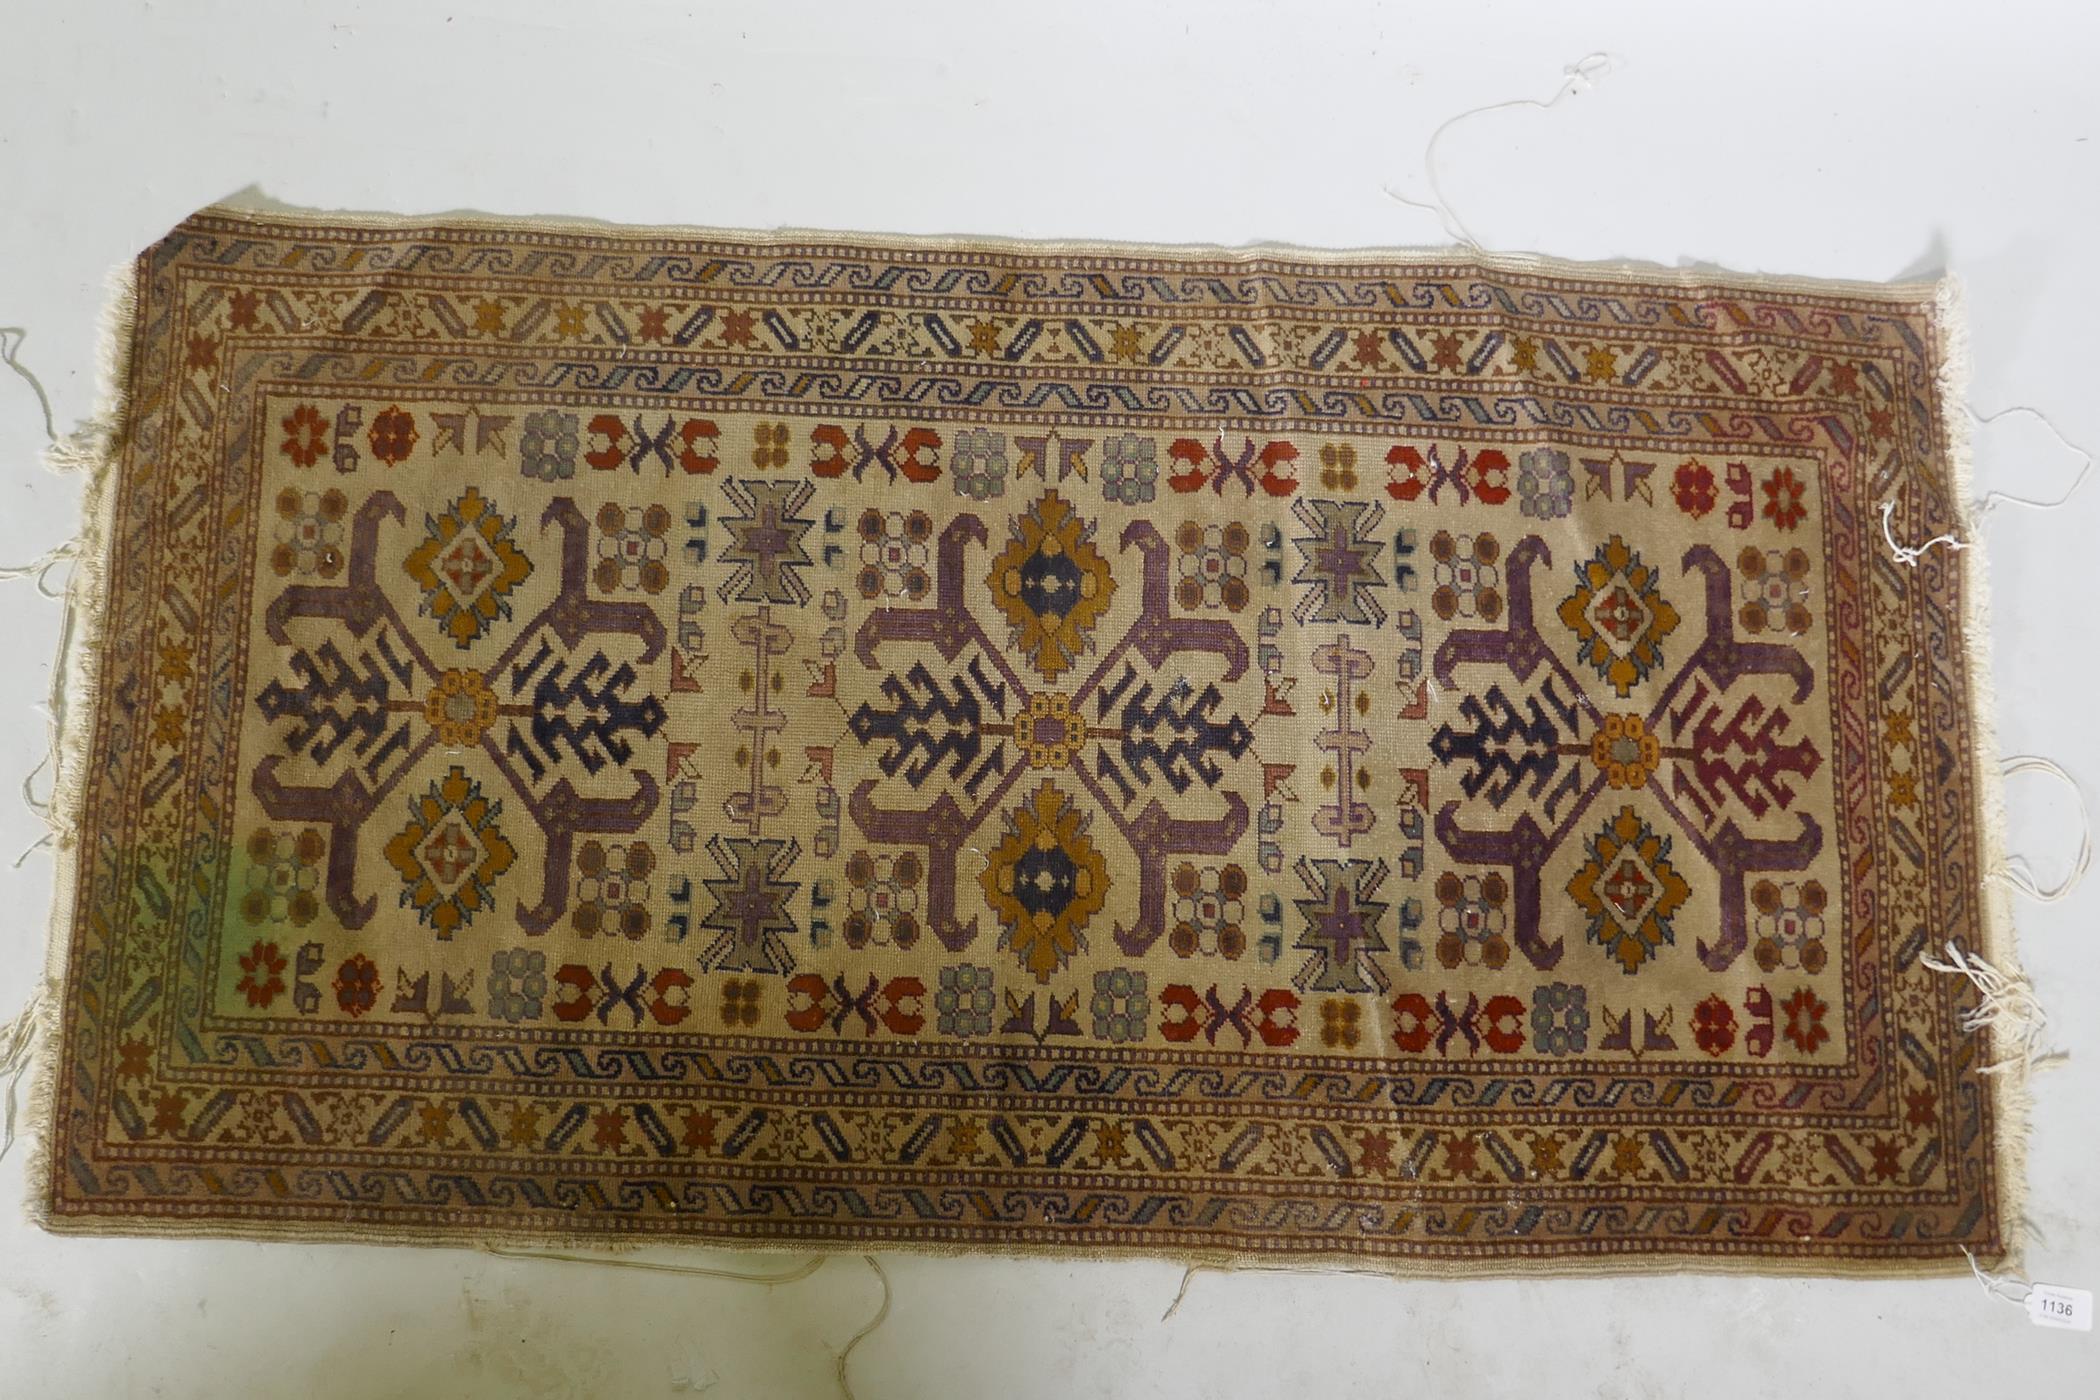 An antique hand woven Oriental rug with geometric designs n a buff coloured field, 68 x 125cm - Image 2 of 3